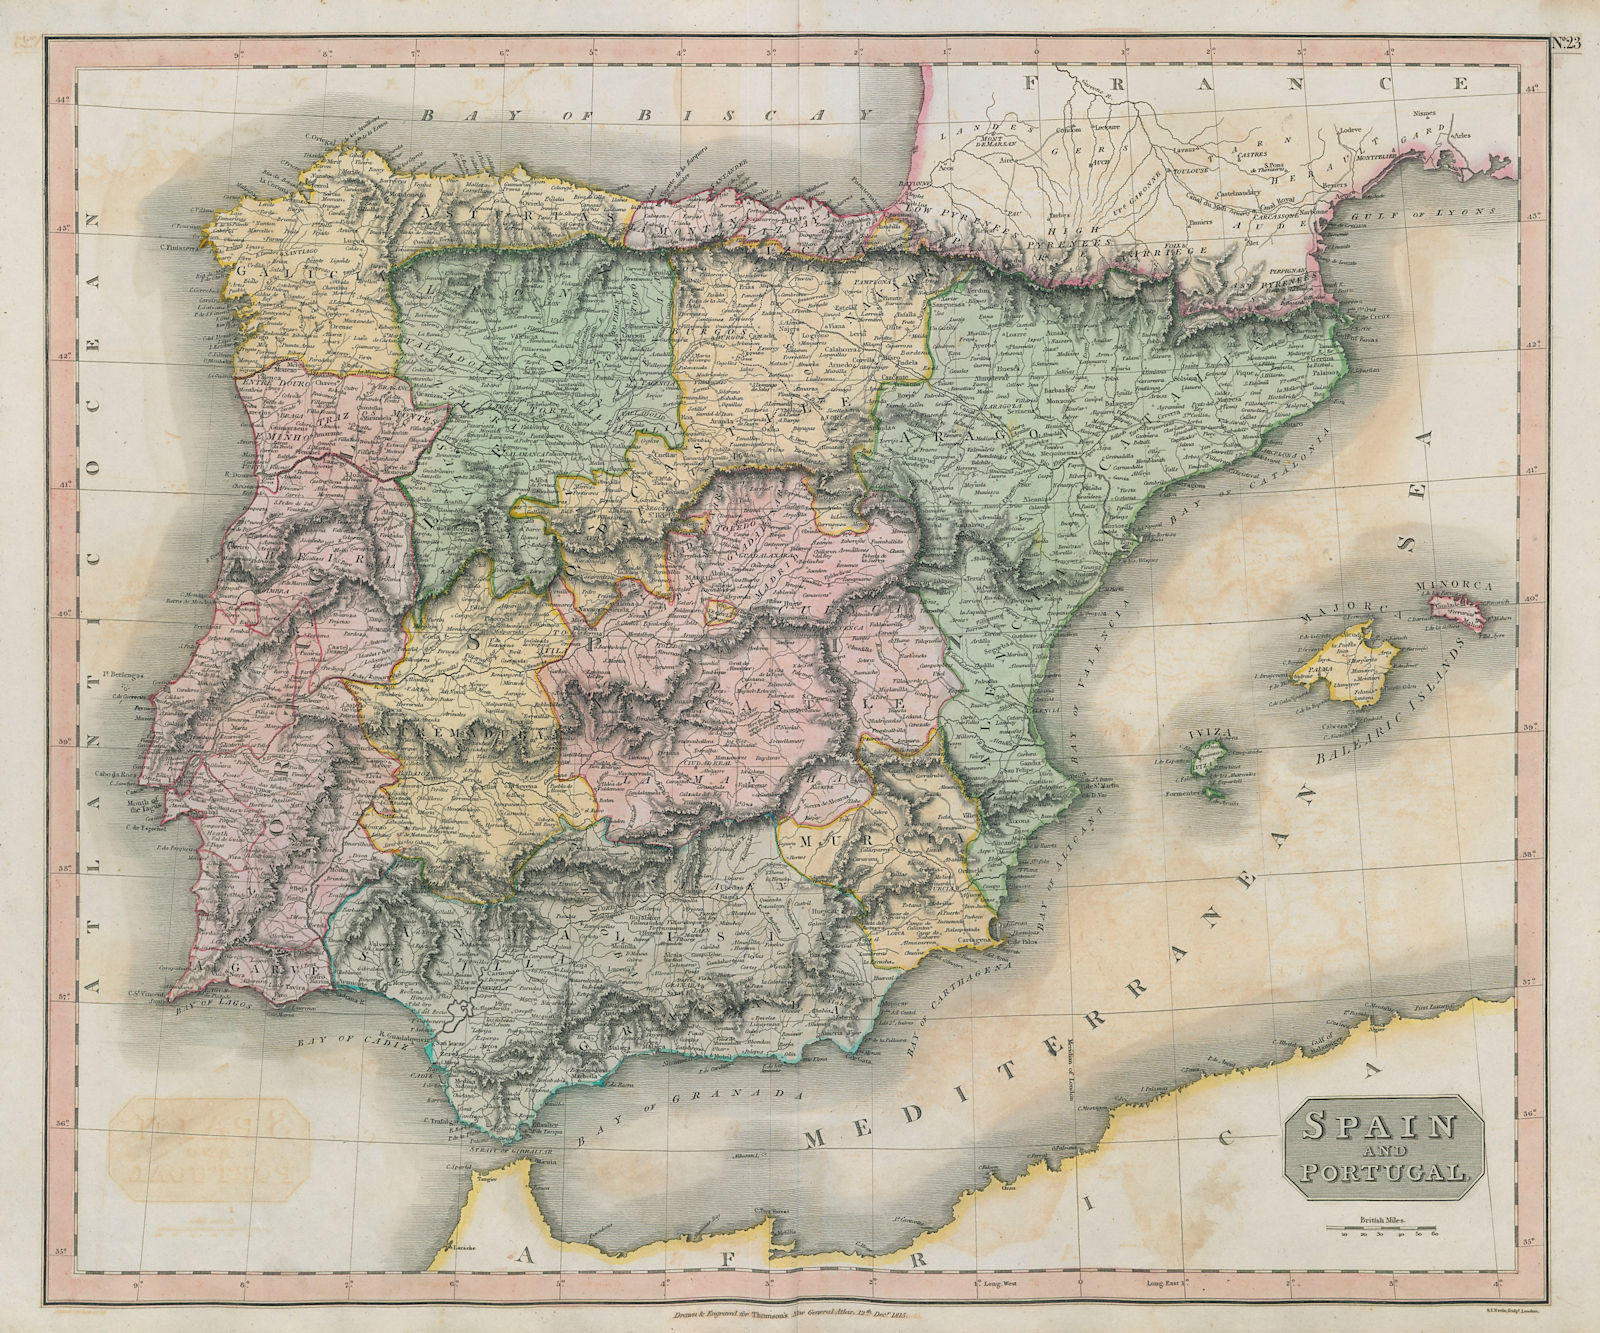 Associate Product "Spain and Portugal" by John Thomson. Regions. Iberia 1817 old antique map